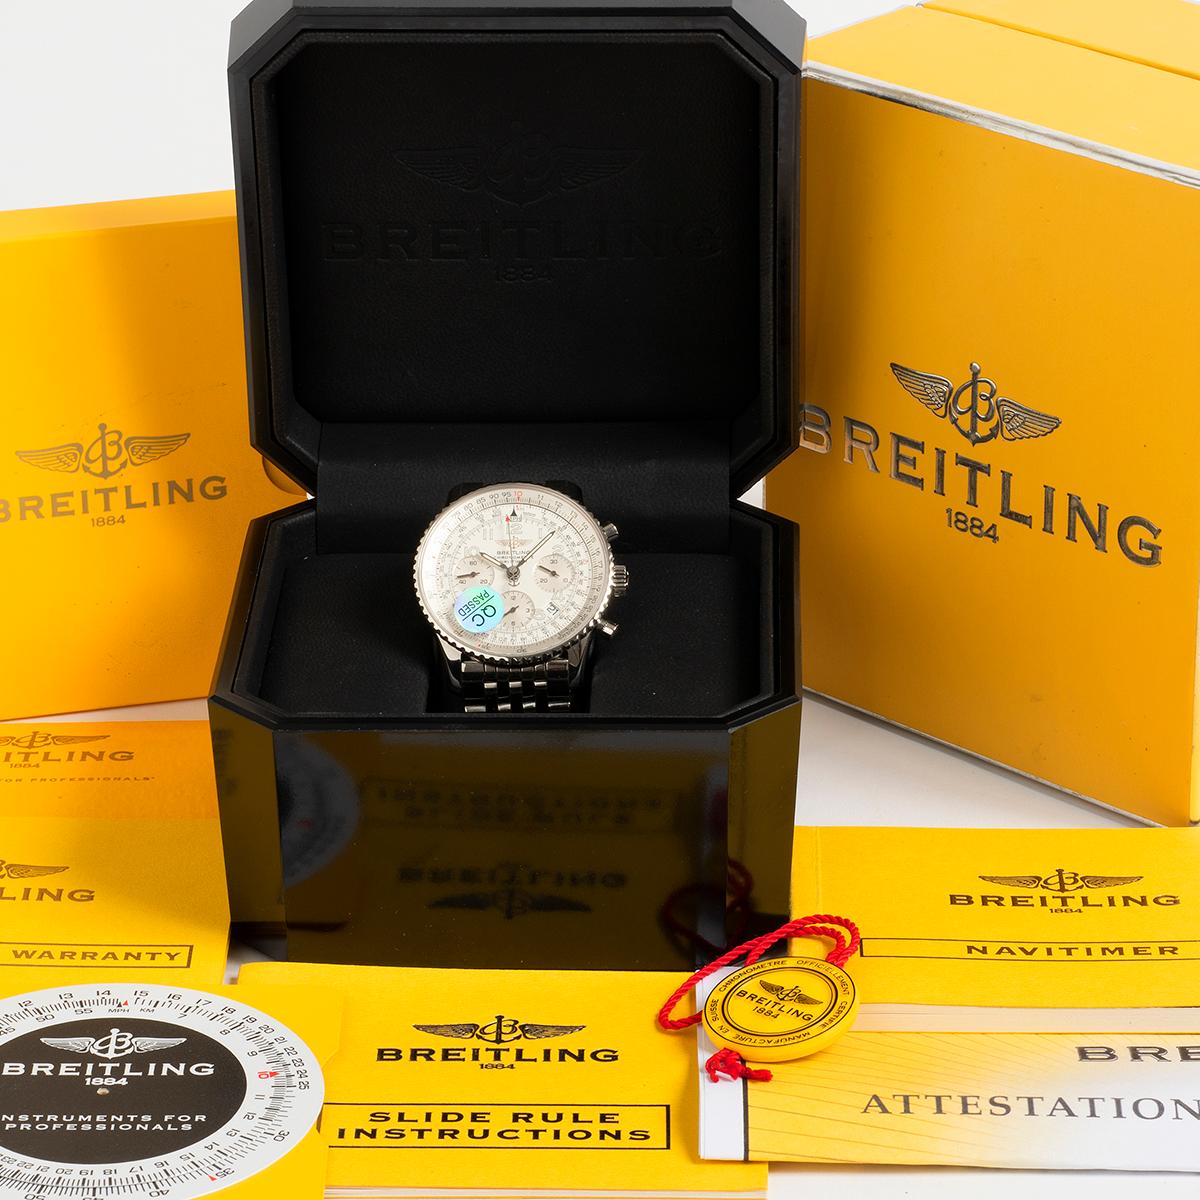 Our Breitling Navitimer chronograph with date features a stainless steel 42mm case with white dial and stainless steel bracelet. A complete set, unworn since a £935 full Breitling service in 2020, this comprises inner and outer box, slide